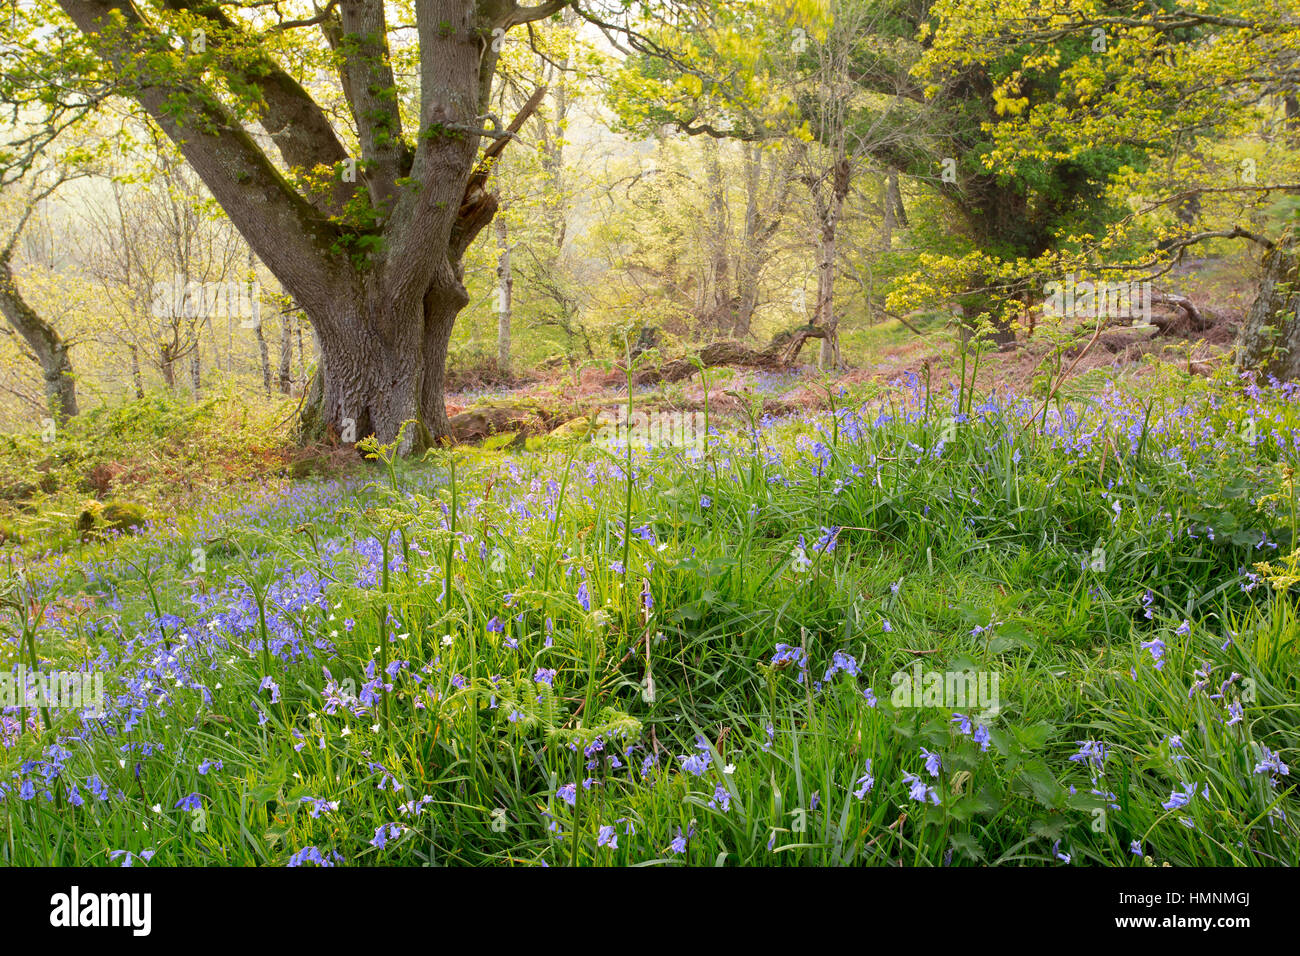 Bluebells in early summer in an English woodland. Uk Stock Photo